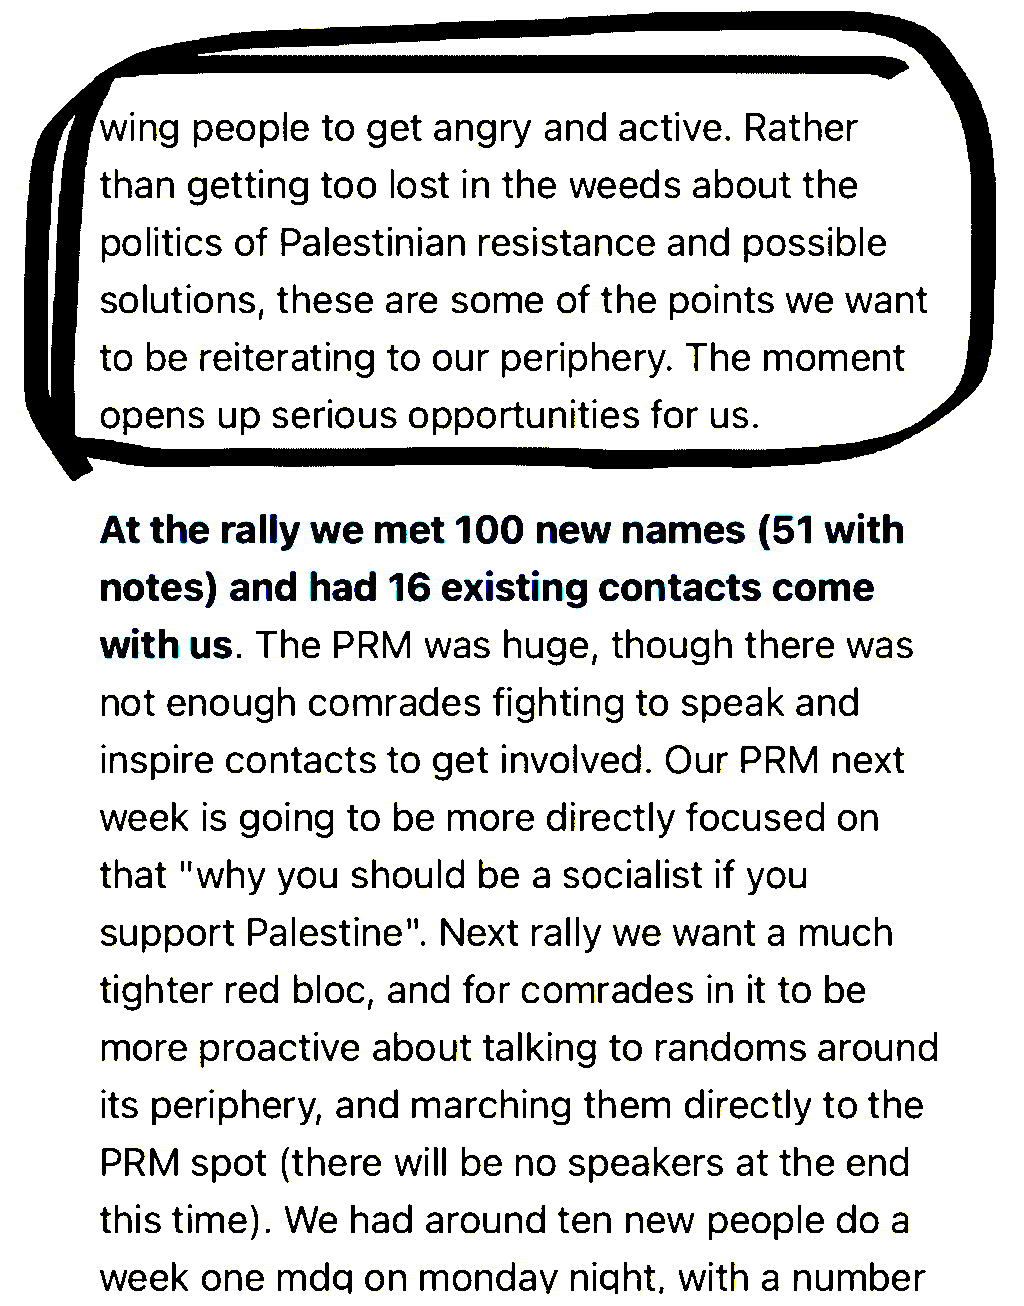 wing people to get angry and active. Rather
than getting too lost in the weeds about the
politics of Palestinian resistance and possible

solutions, these are some of the points we want
to be reiterating to our periphery. The moment
opens up serious opportunities for us.

At the rally we met 100 new names (51 with
notes) and had 16 existing contacts come
with us. The PRM was huge, though there was
not enough comrades fighting to speak and
inspire contacts to get involved. Our PRM next
week is going to be more directly focused on
that 'why you should be a socialist if you
support Palestine'. Next rally we want a much
tighter red bloc, and for comrades in it to be
more proactive about talking to randoms around
its periphery, and marching them directly to the
PRM spot (there will be no speakers at the end
this time). We had around ten new people do a
week one mda on monday night, with a number